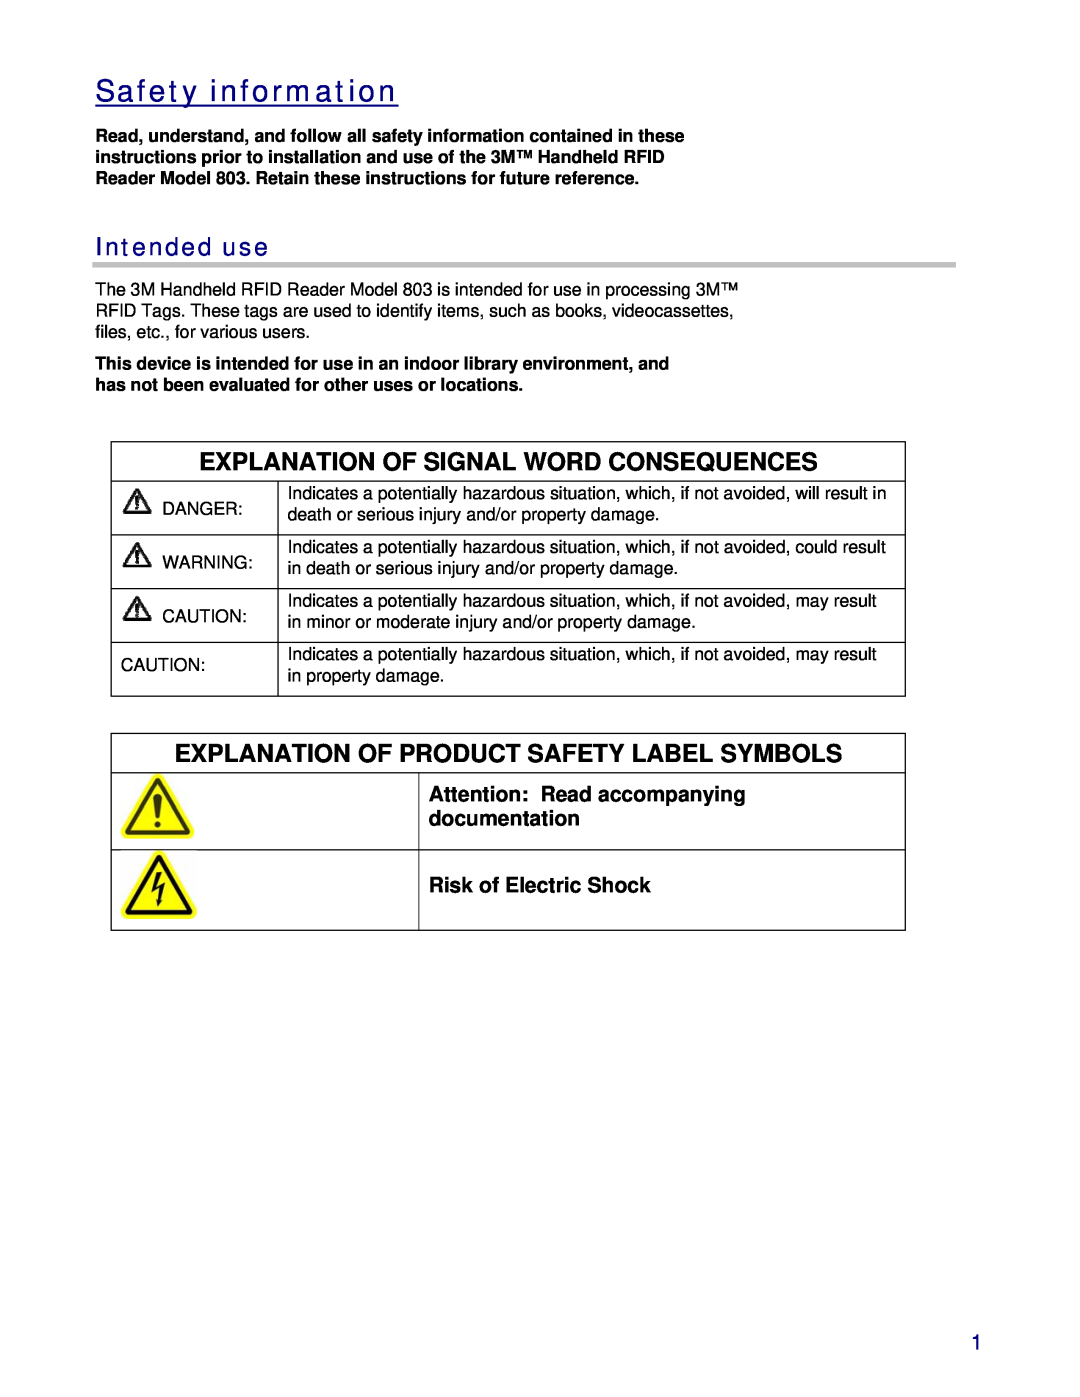 3M 803 owner manual Safety information, Intended use, Attention Read accompanying documentation Risk of Electric Shock 